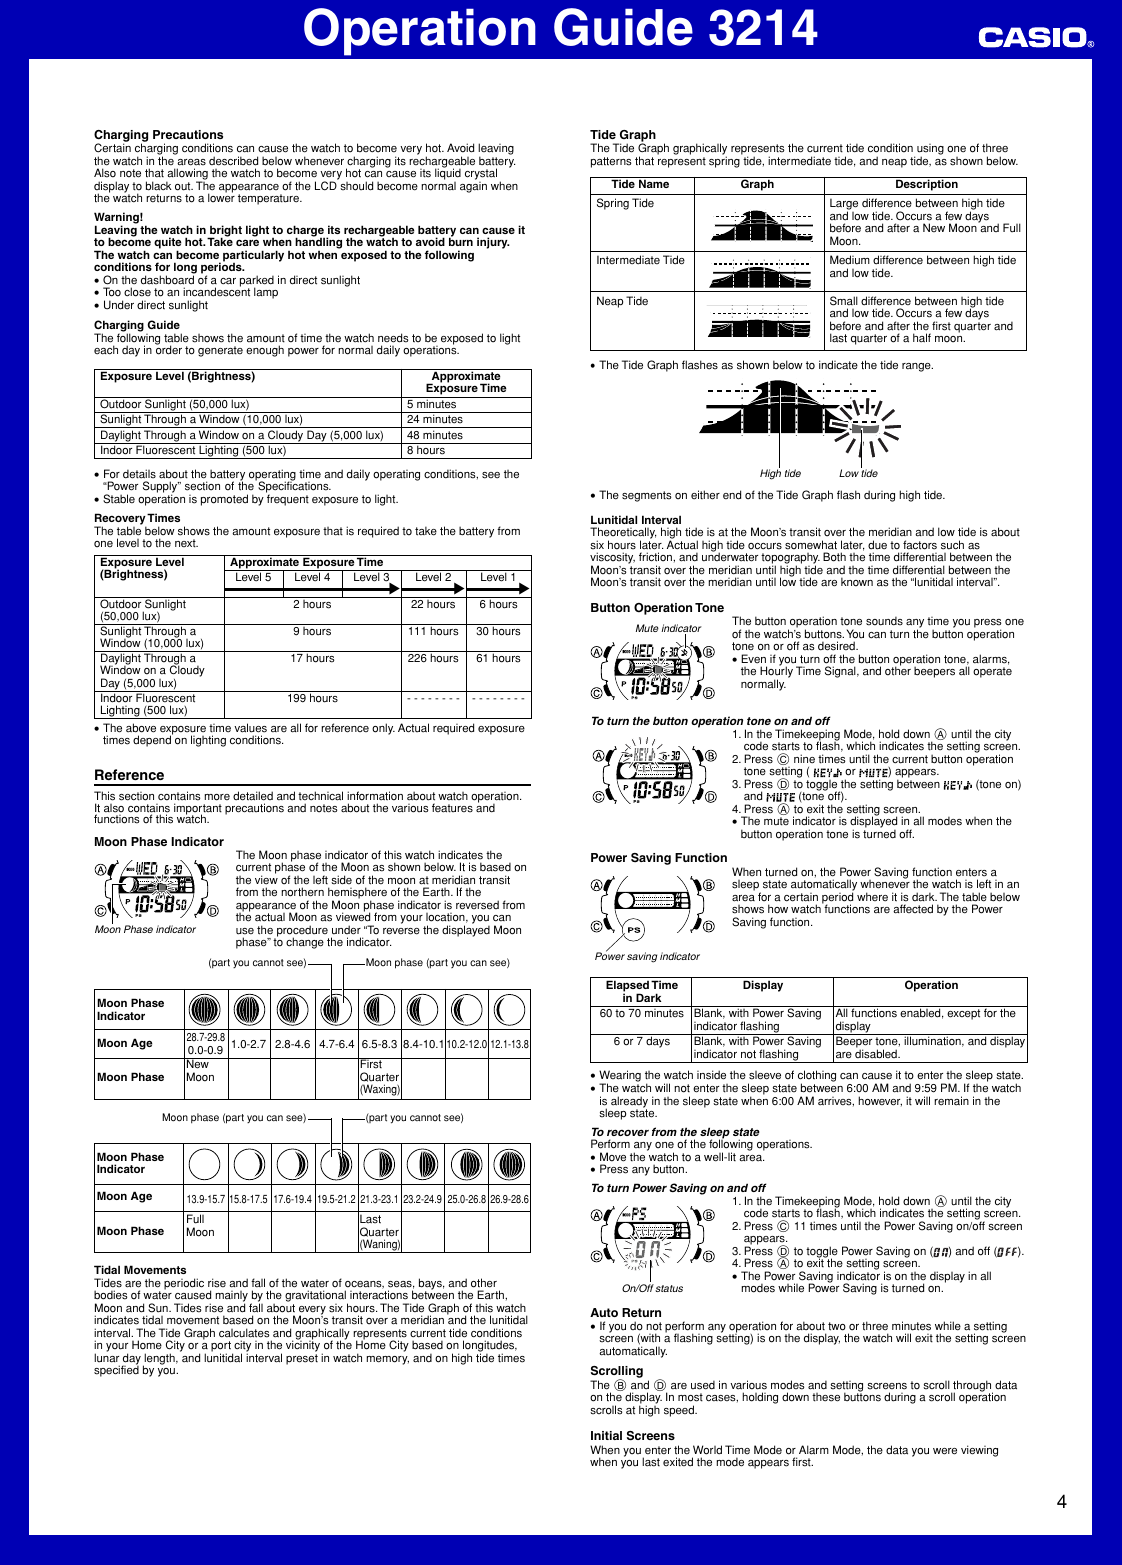 Page 4 of 5 - Casio Casio-Ws210H-1Av-Operation-Manual- QW-3214  Casio-ws210h-1av-operation-manual